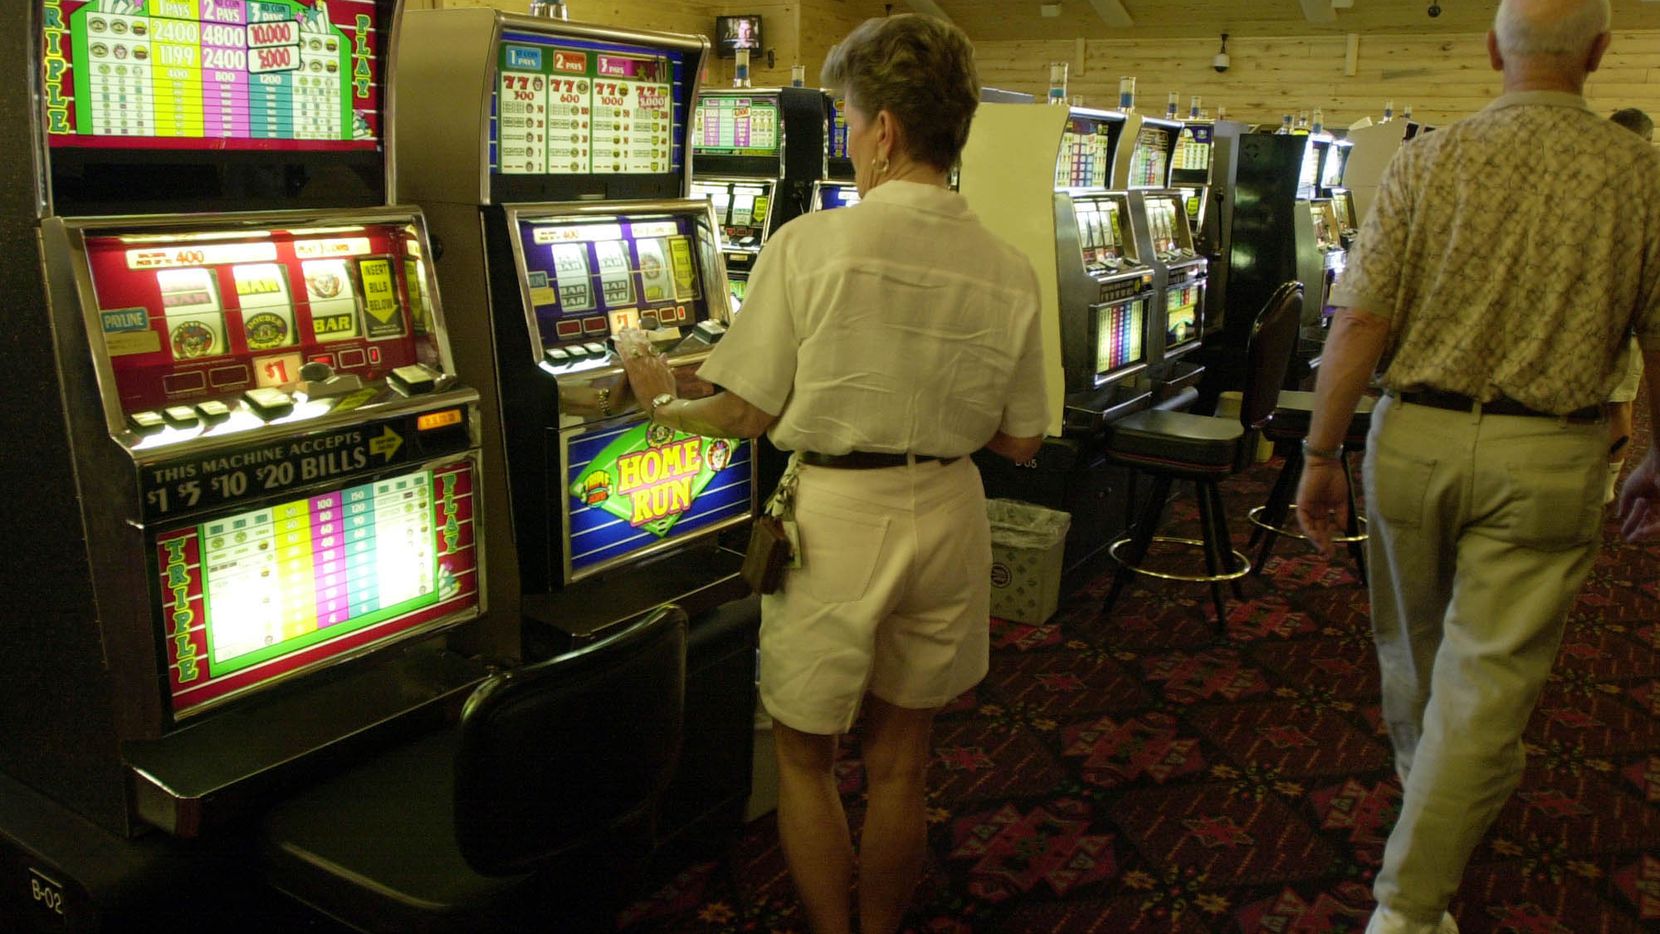 Where can i buy a slot machine for home use